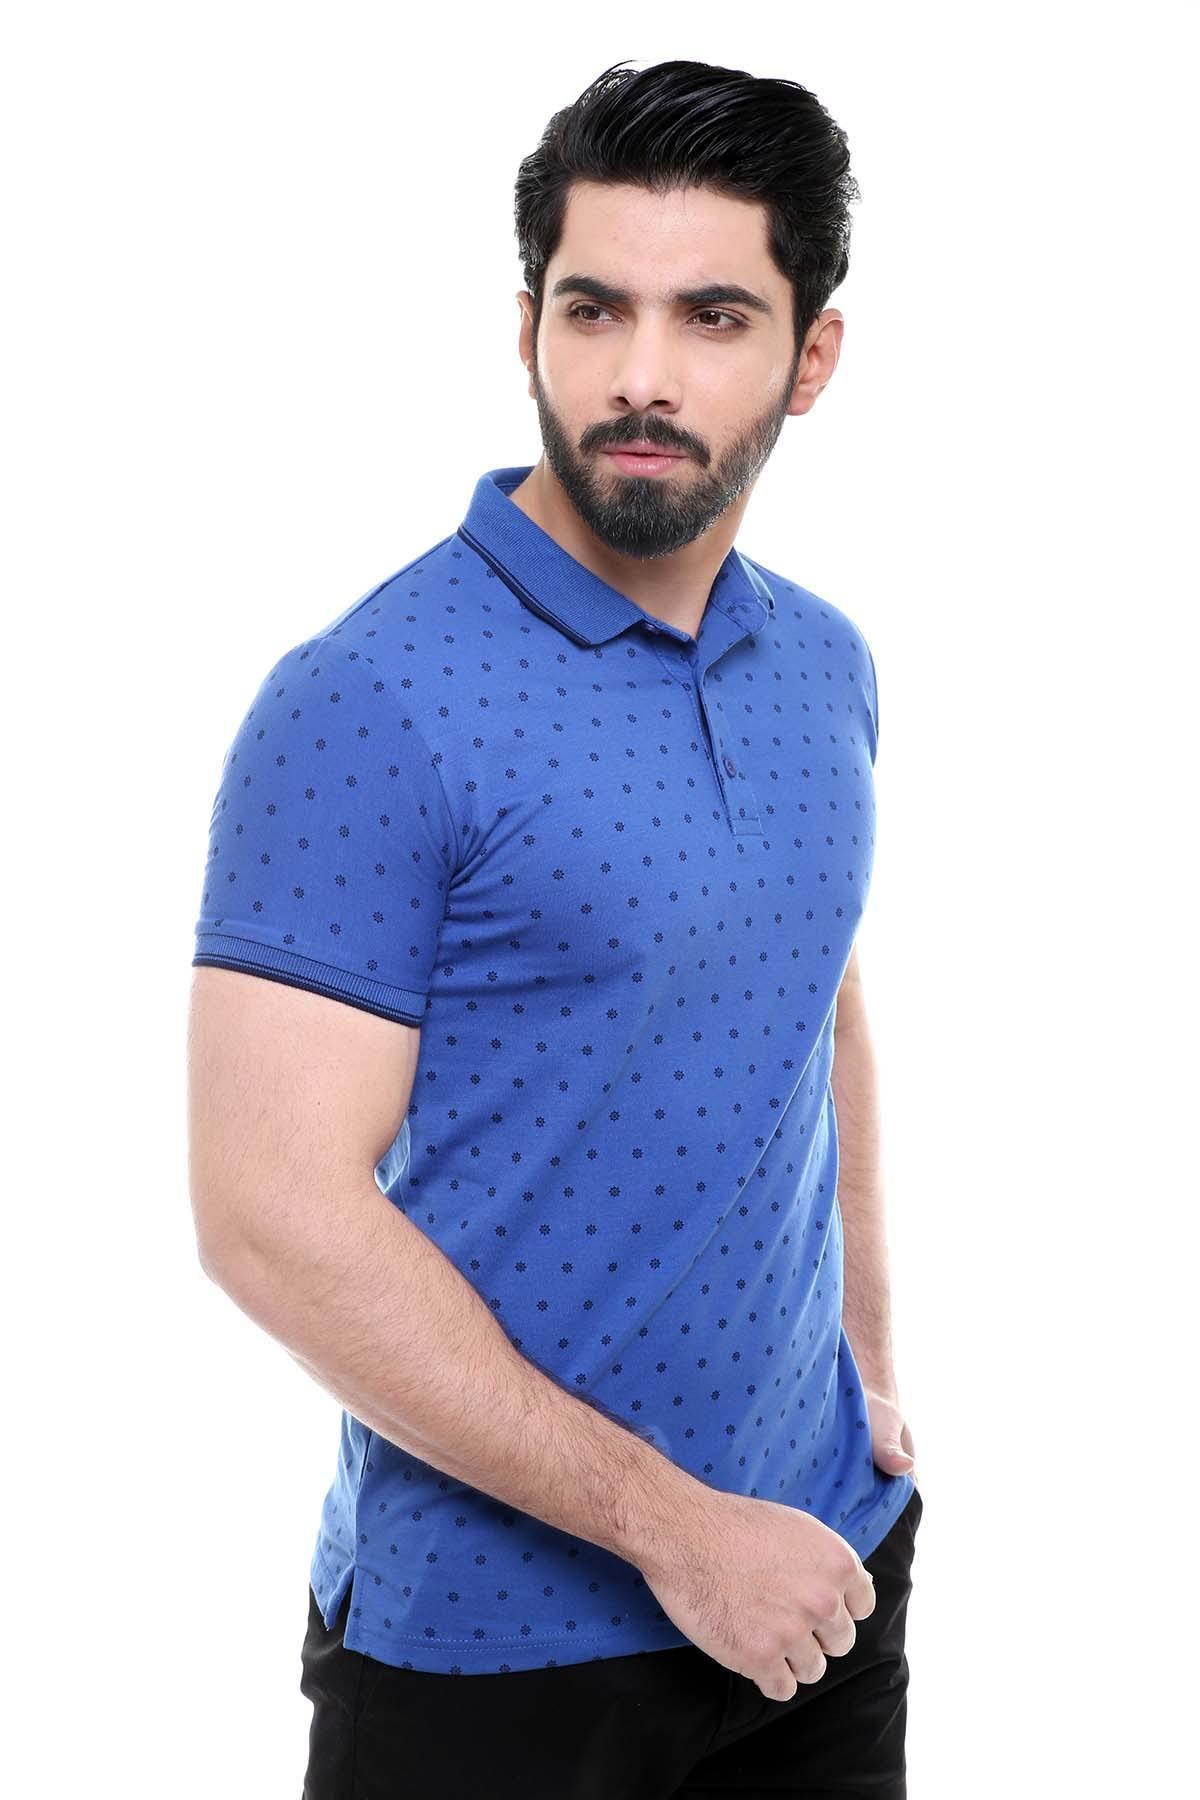 T SHIRT POLO INK BLUE at Charcoal Clothing